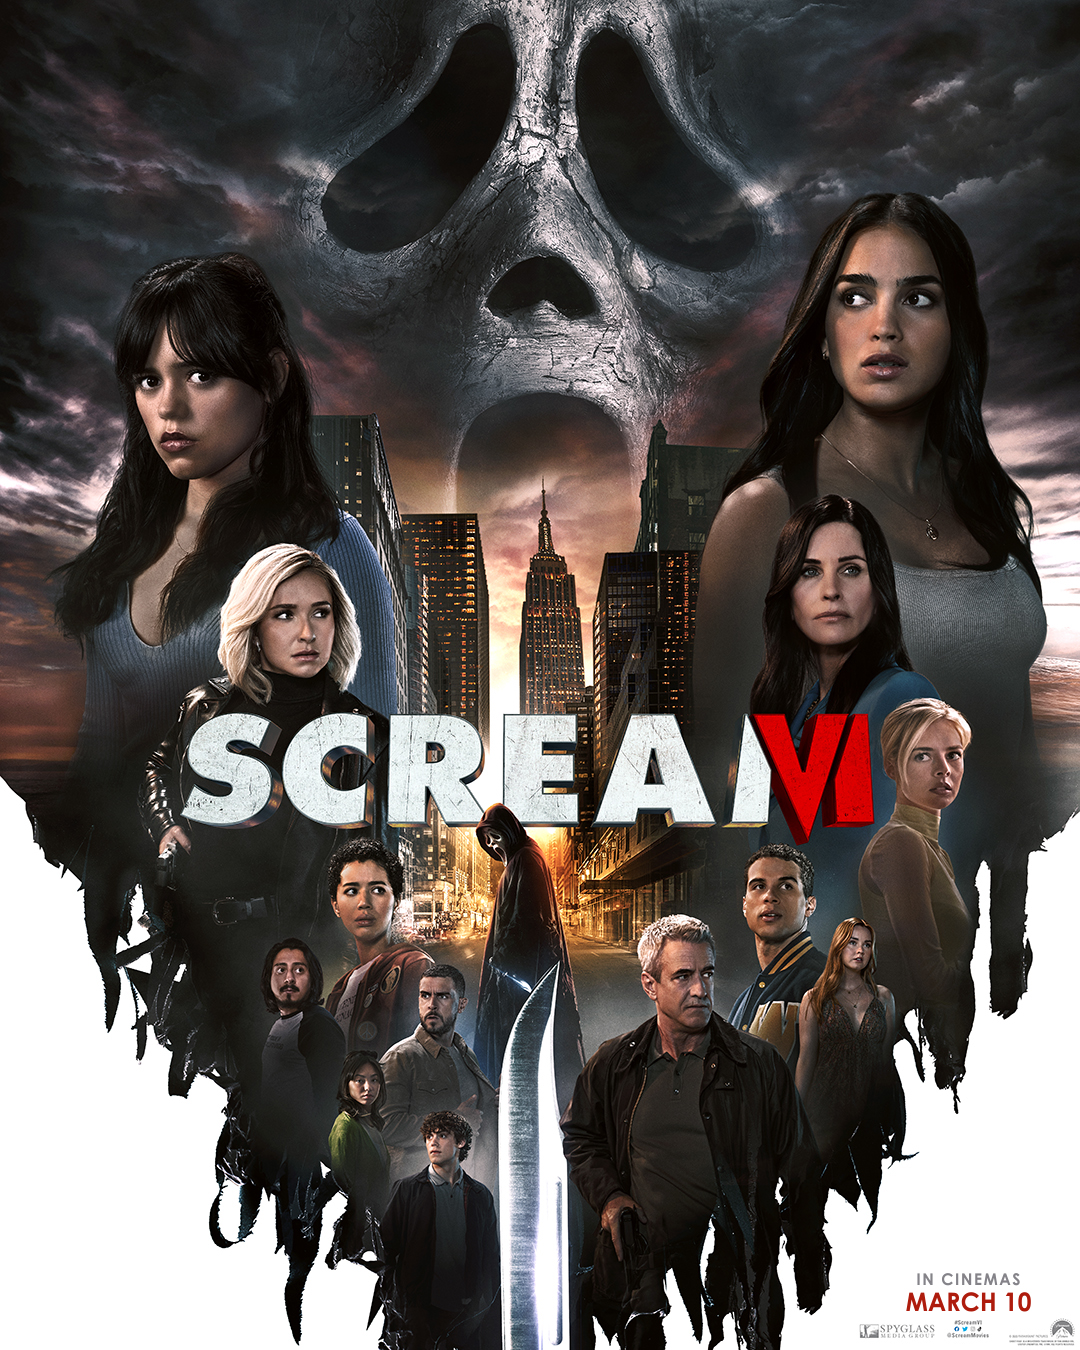 Scream VI Review: A Barnstorming and Bloody Rampage